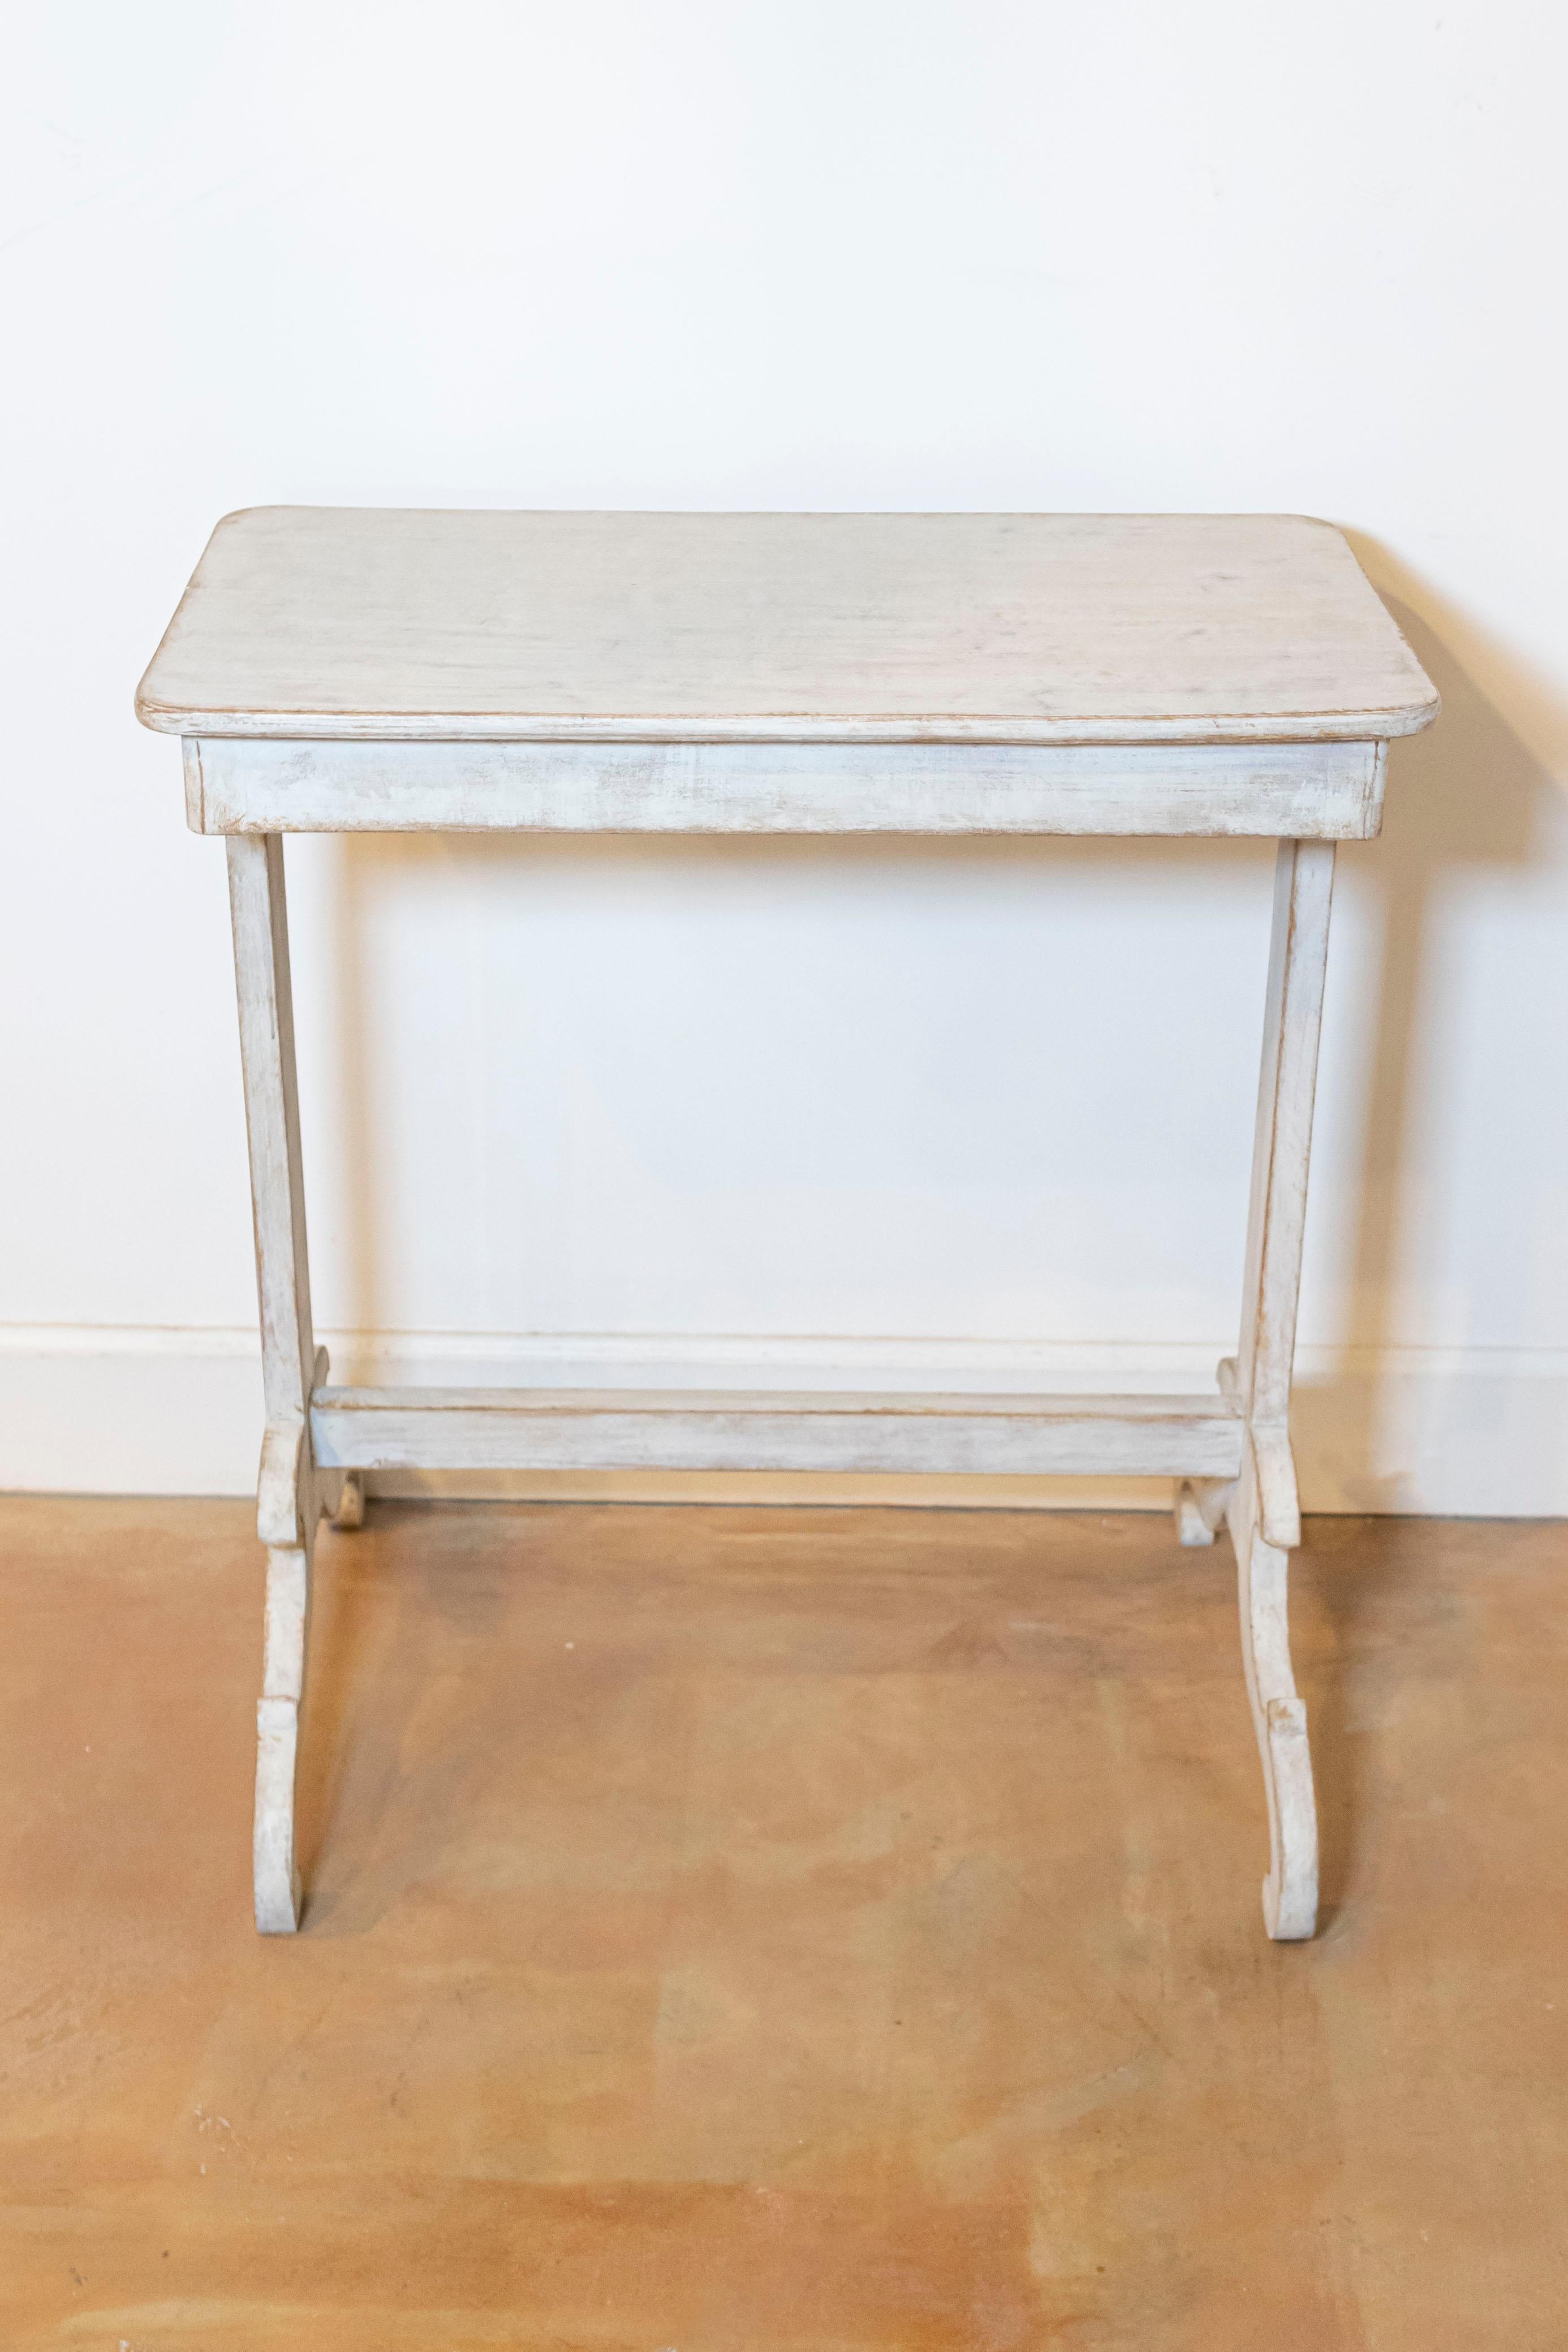 19th Century Swedish Light Gray Painted Side Table with Carved Trestle Base In Good Condition For Sale In Atlanta, GA